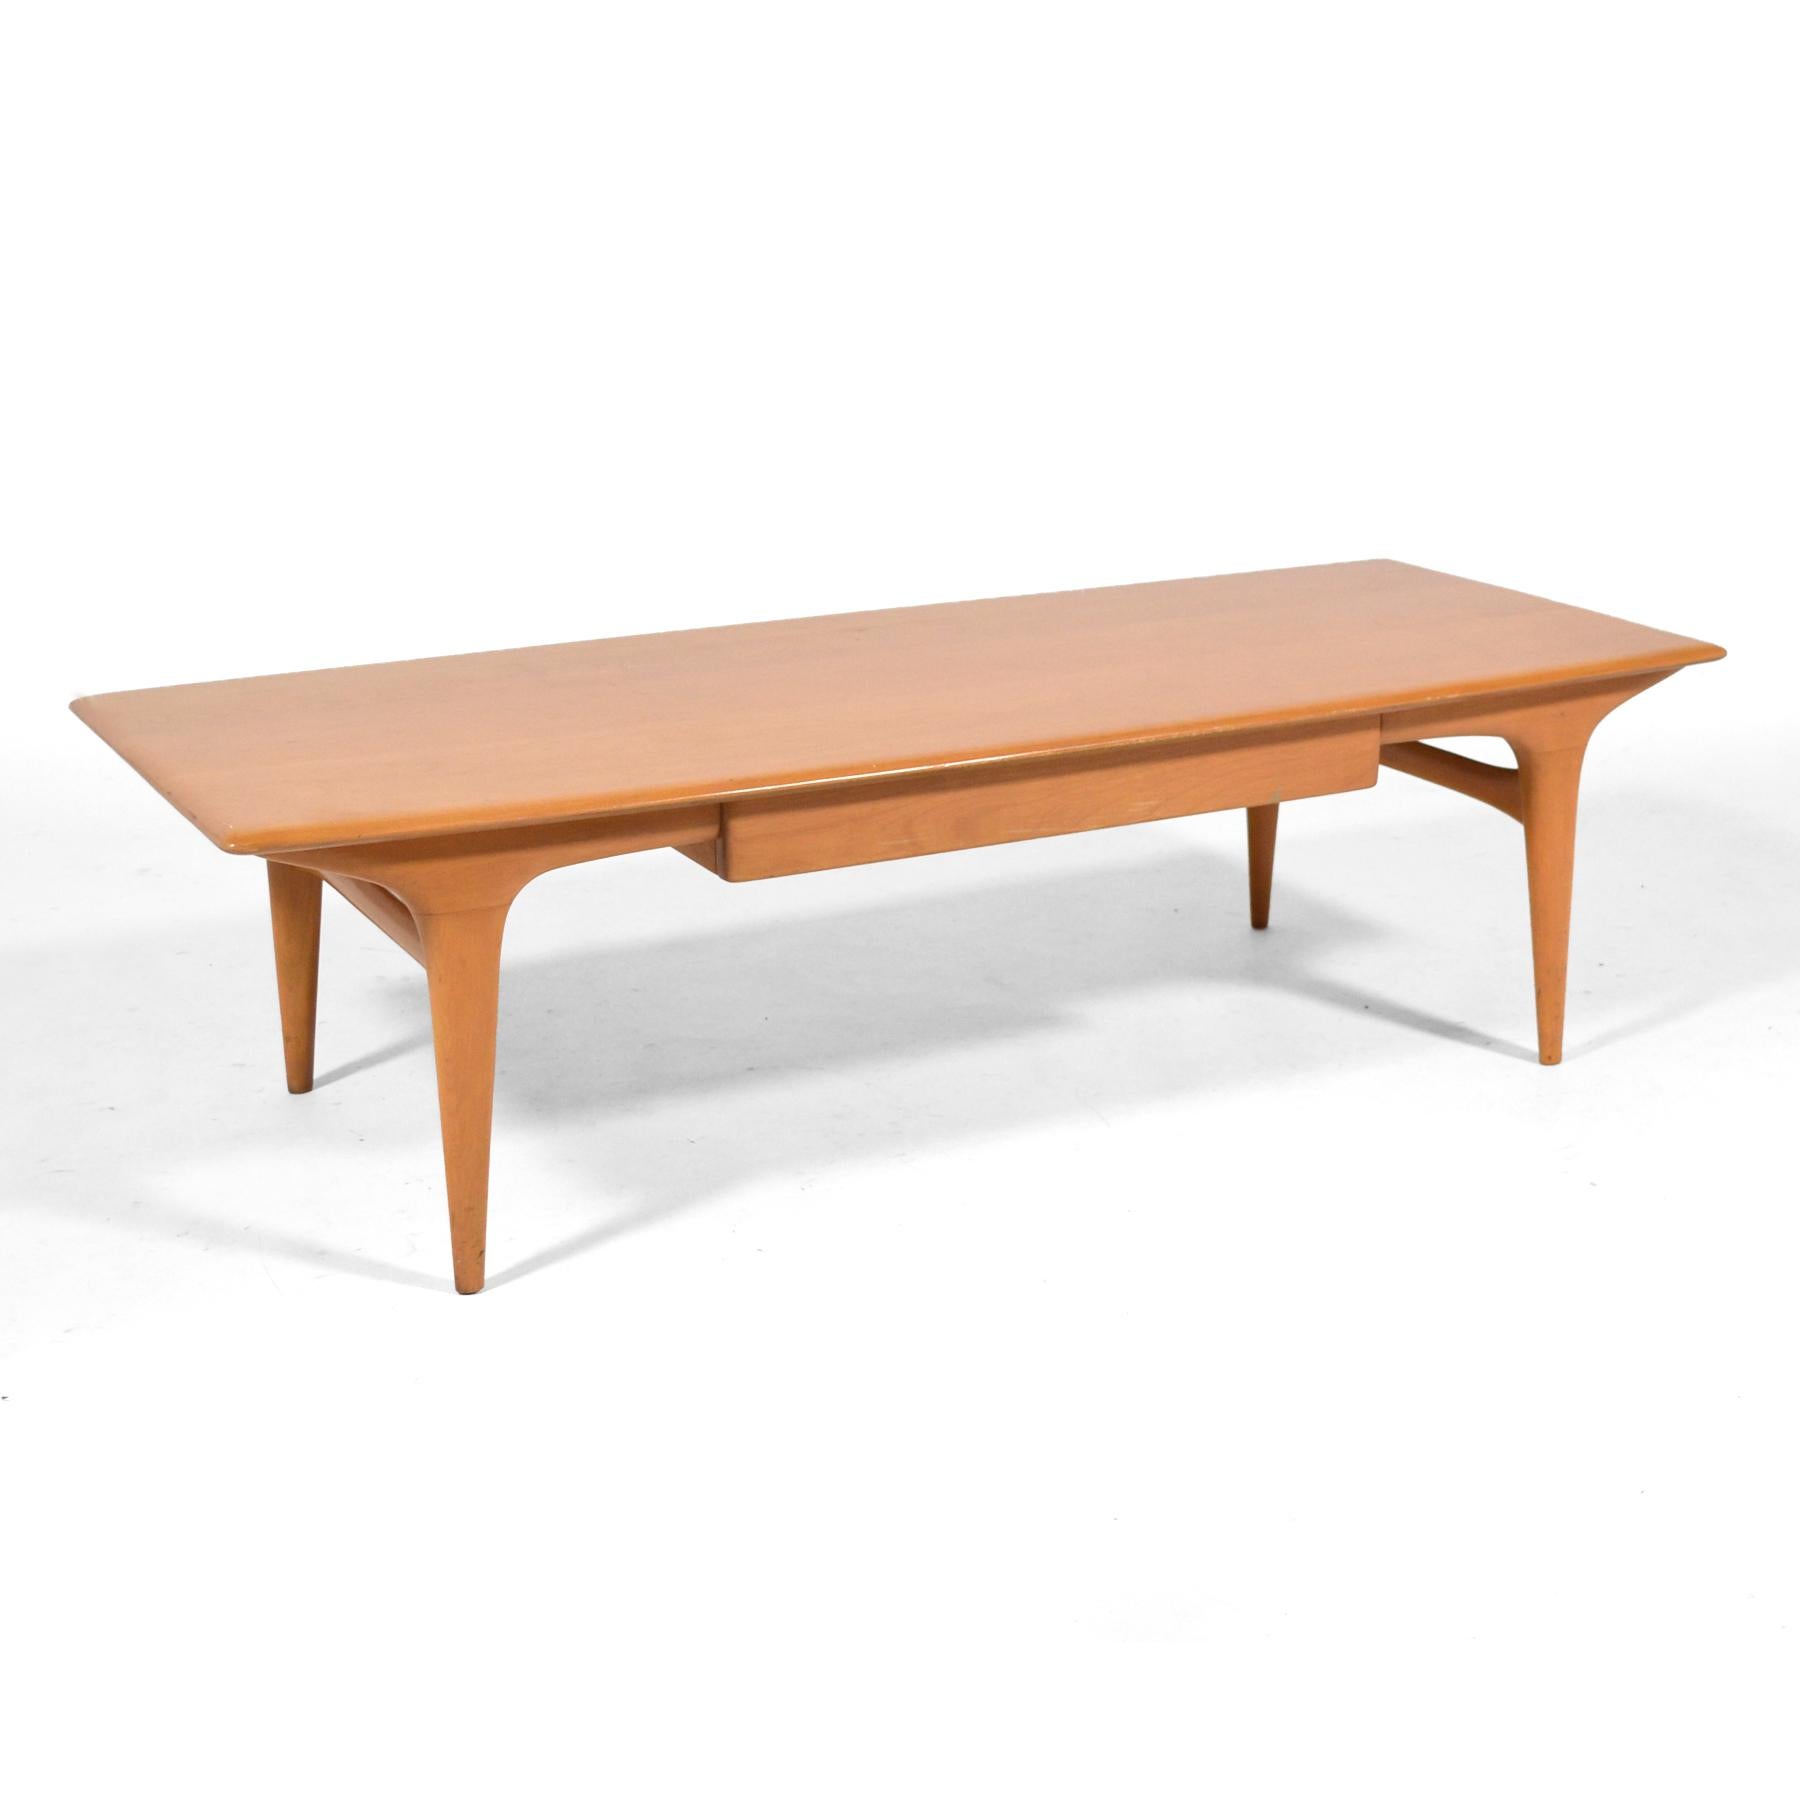 This rare Heywood Wakefield model M1585 coffee table is not just a very uncommon and beautiful form, it is in fantastic original condition including its champaign finish. The design was only produced between 1956 and 1958.